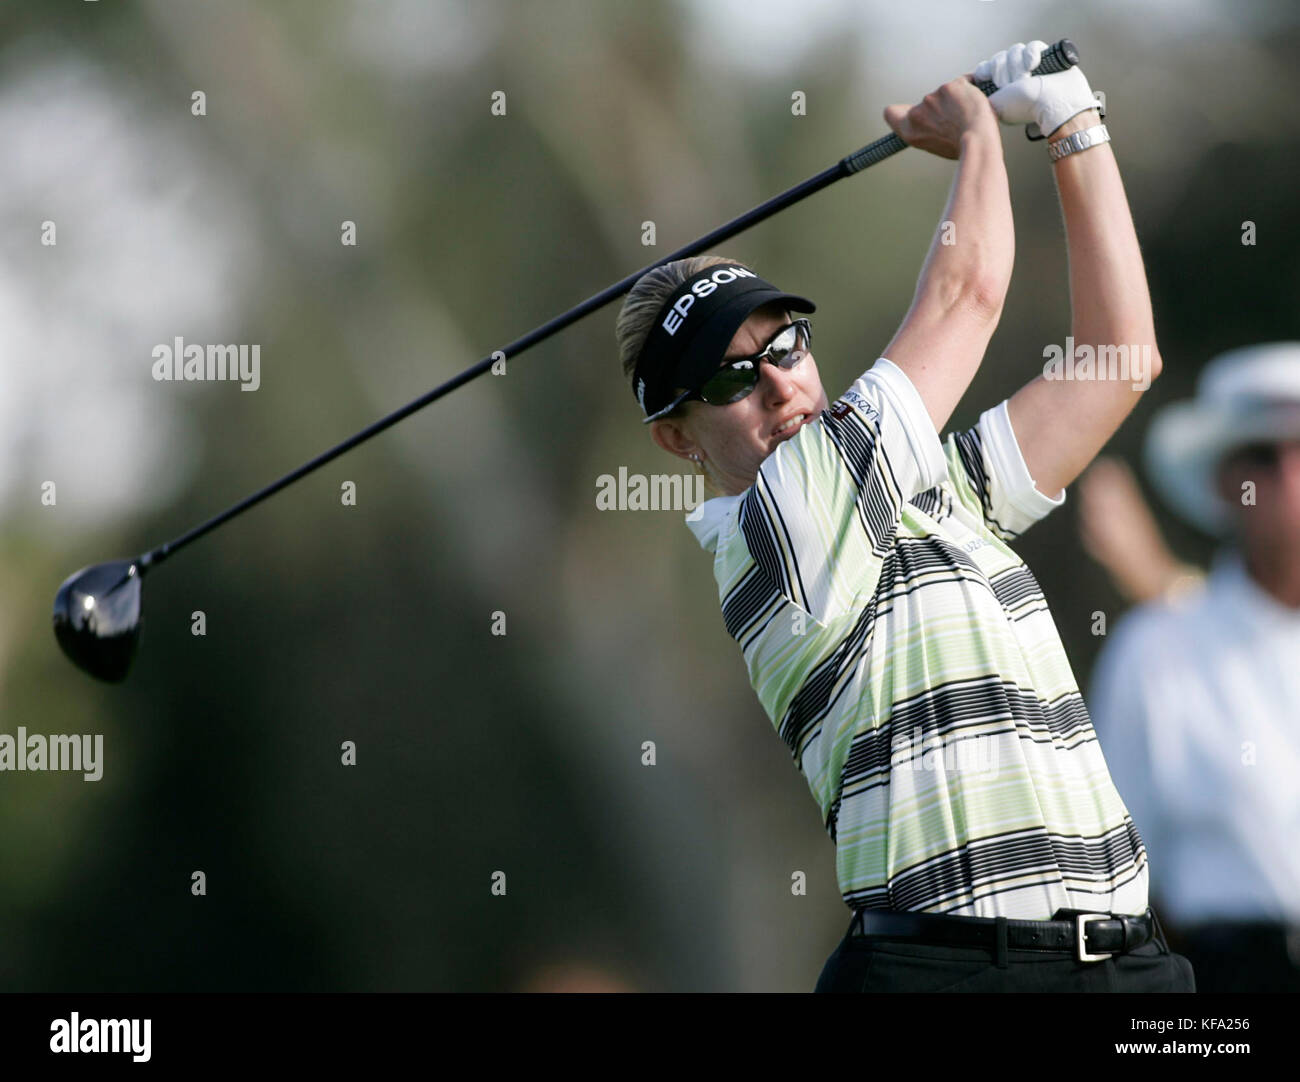 Karrie Webb of Australia watches shot from the second tee during the final round of the LPGA Kraft Nabisco Championship golf tournament on Sunday, April 2, 2006, at the Mission Hills Country Club, in Rancho Mirage, Calif. Photo by Francis Specker Stock Photo